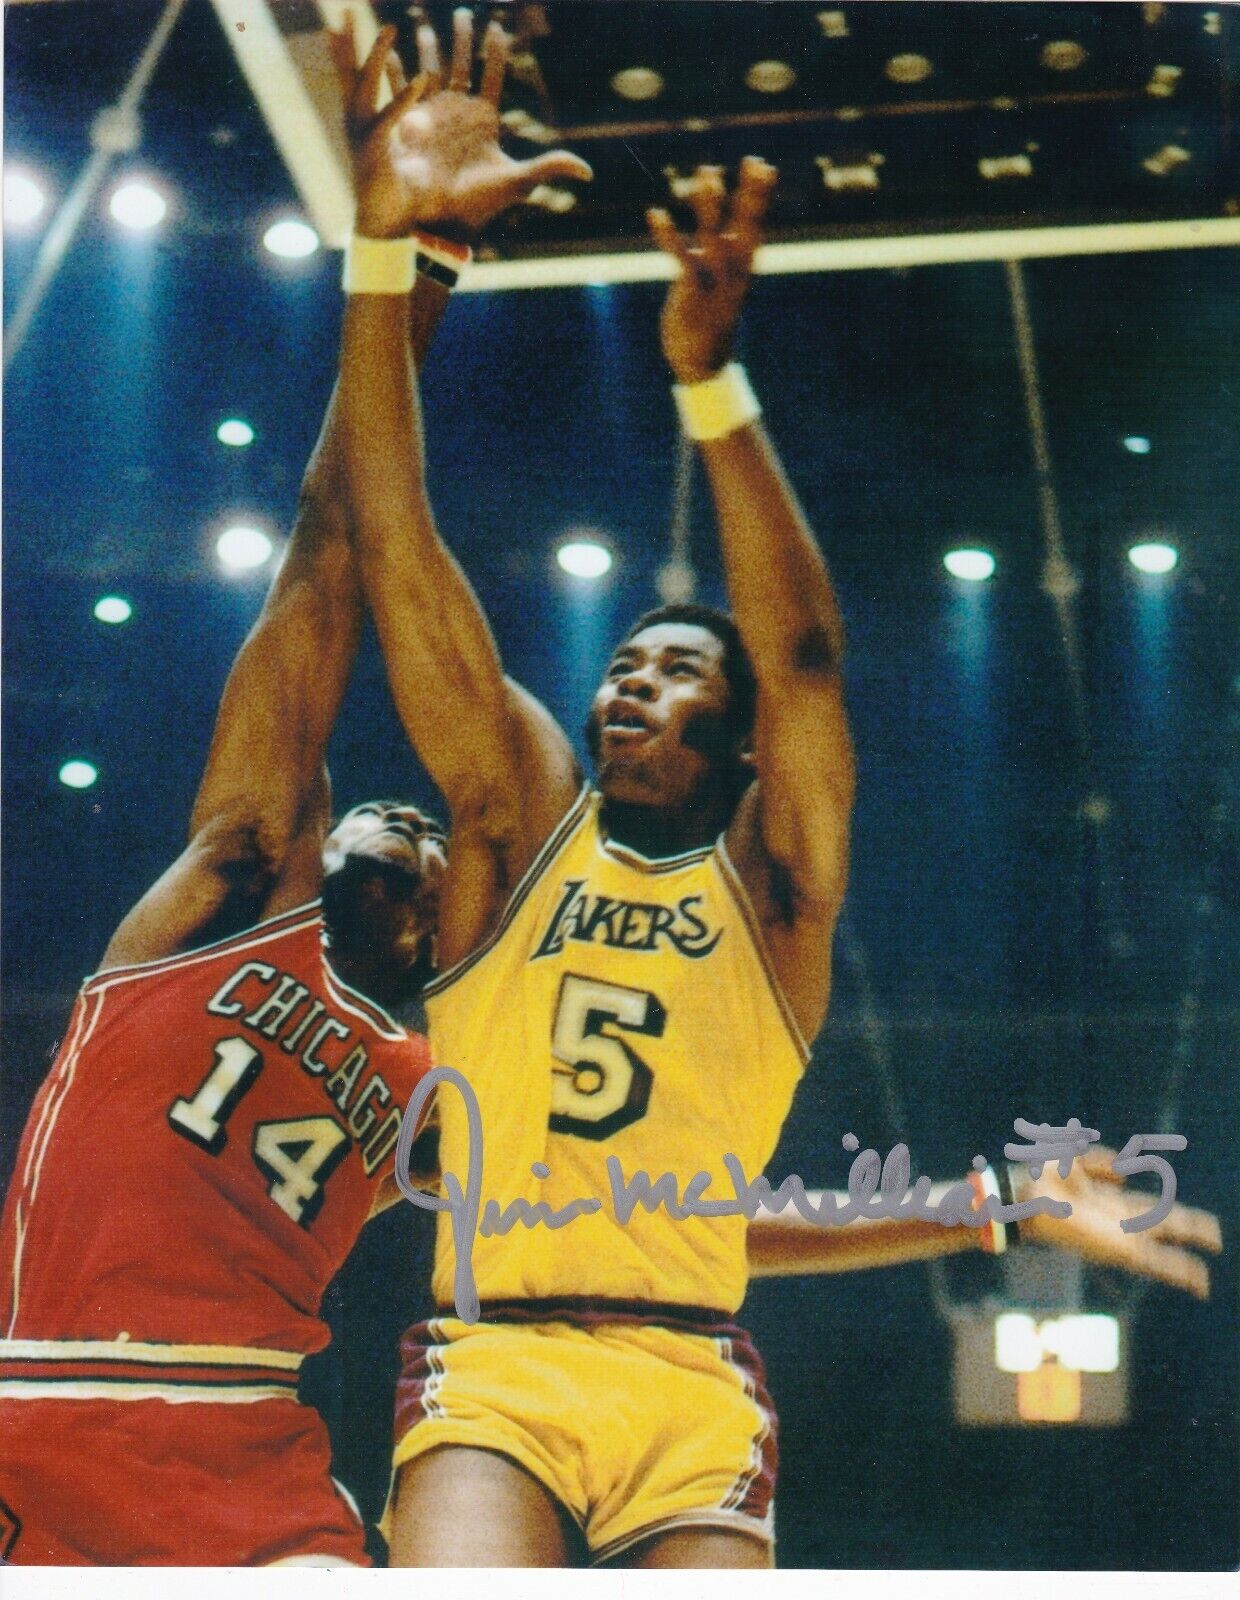 JIM MCMILLIAN LOS ANGELES LAKERS ACTION SIGNED 8x10